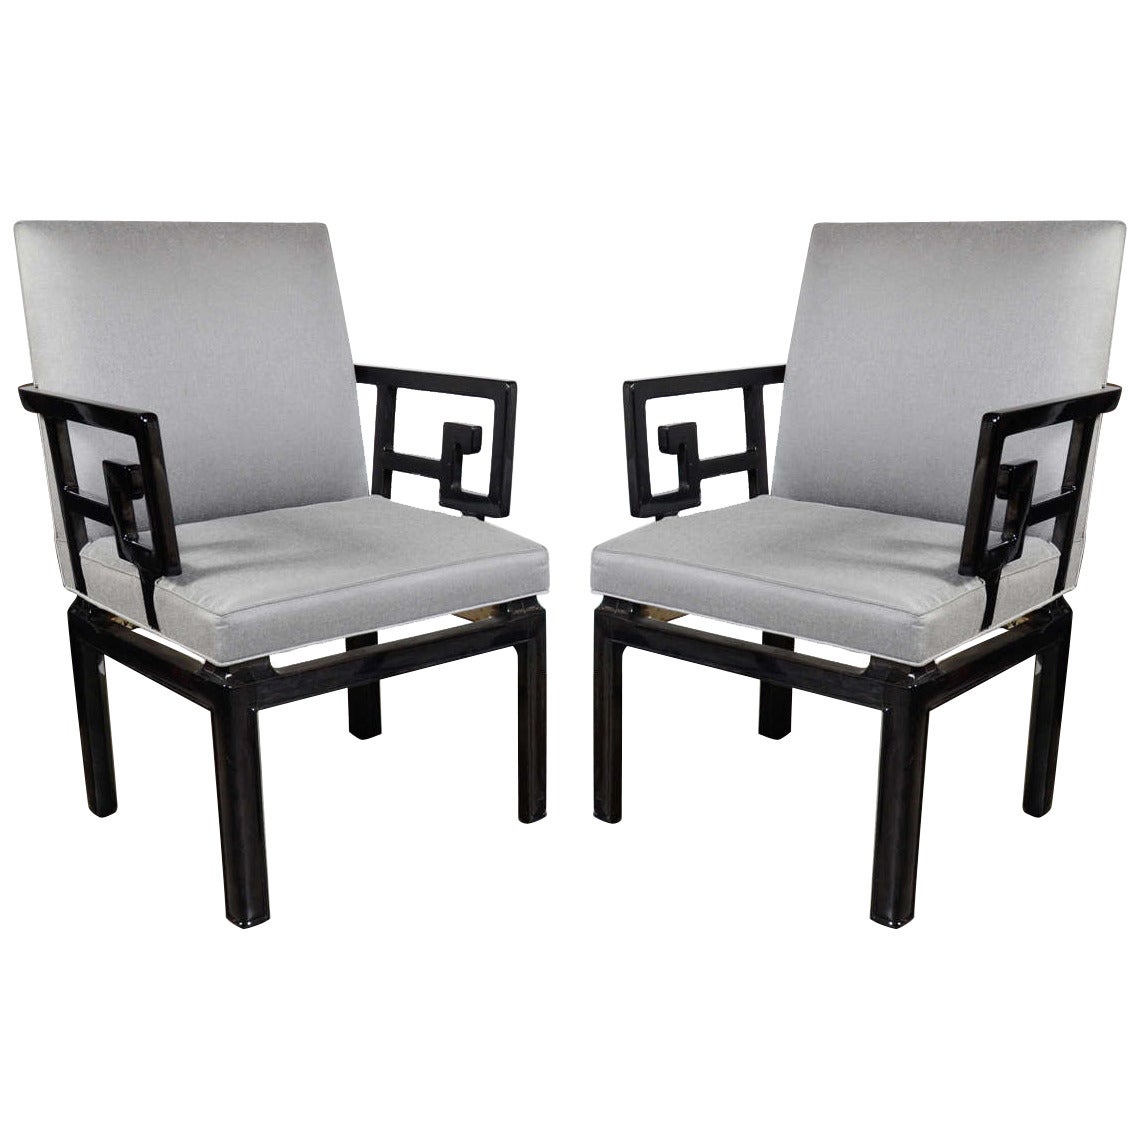 Pair of Mid Century Modern Baker Occasional Chairs in Black Lacquer For Sale